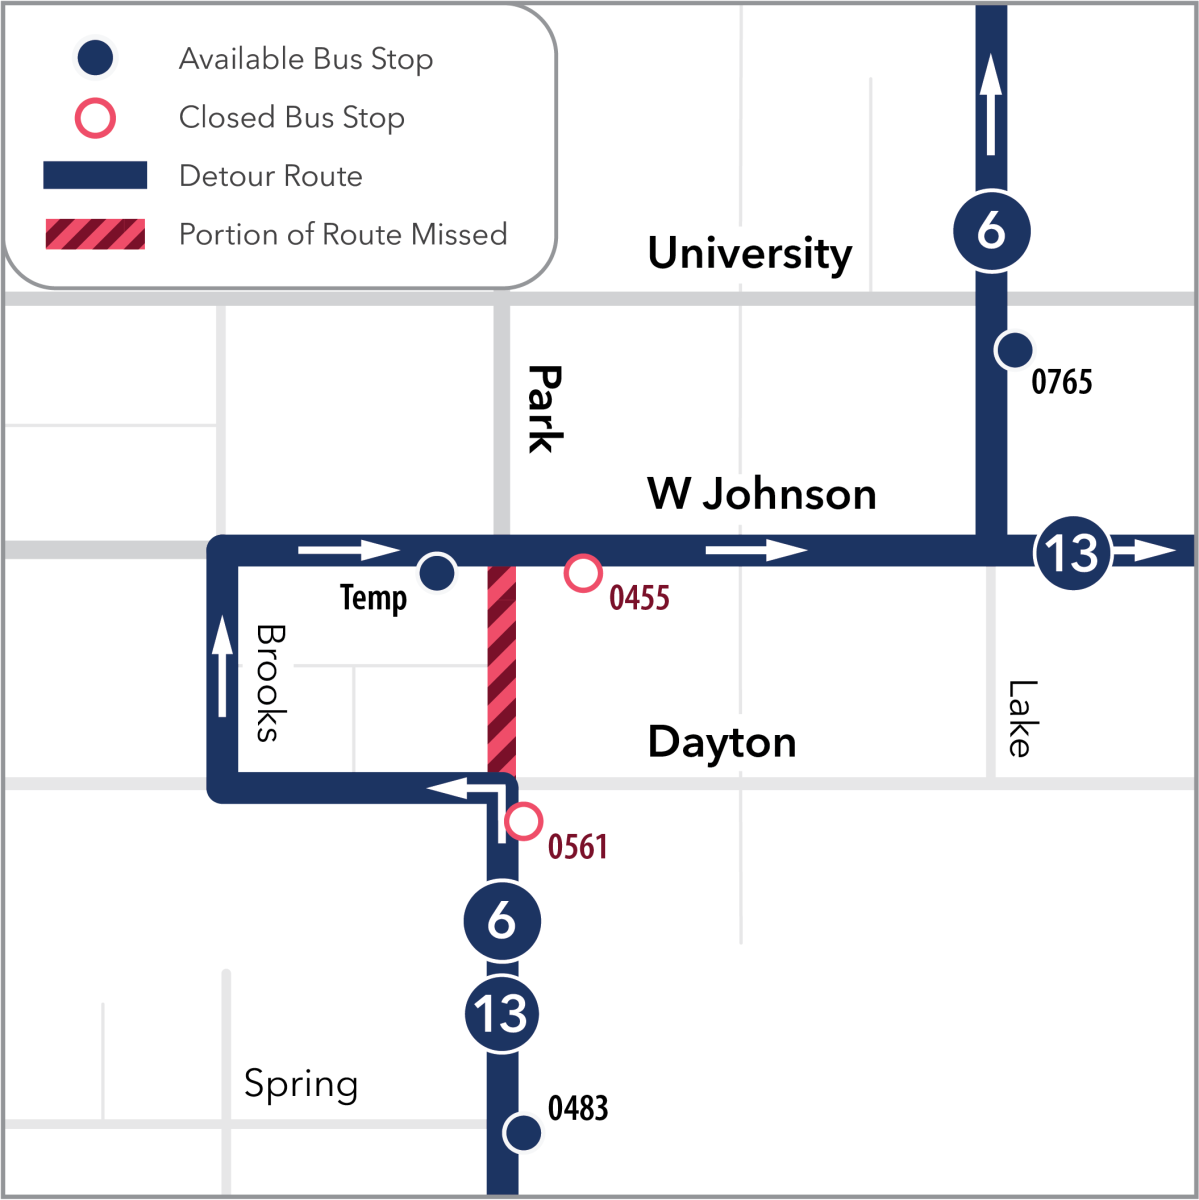 map for stop closures near johnson at park